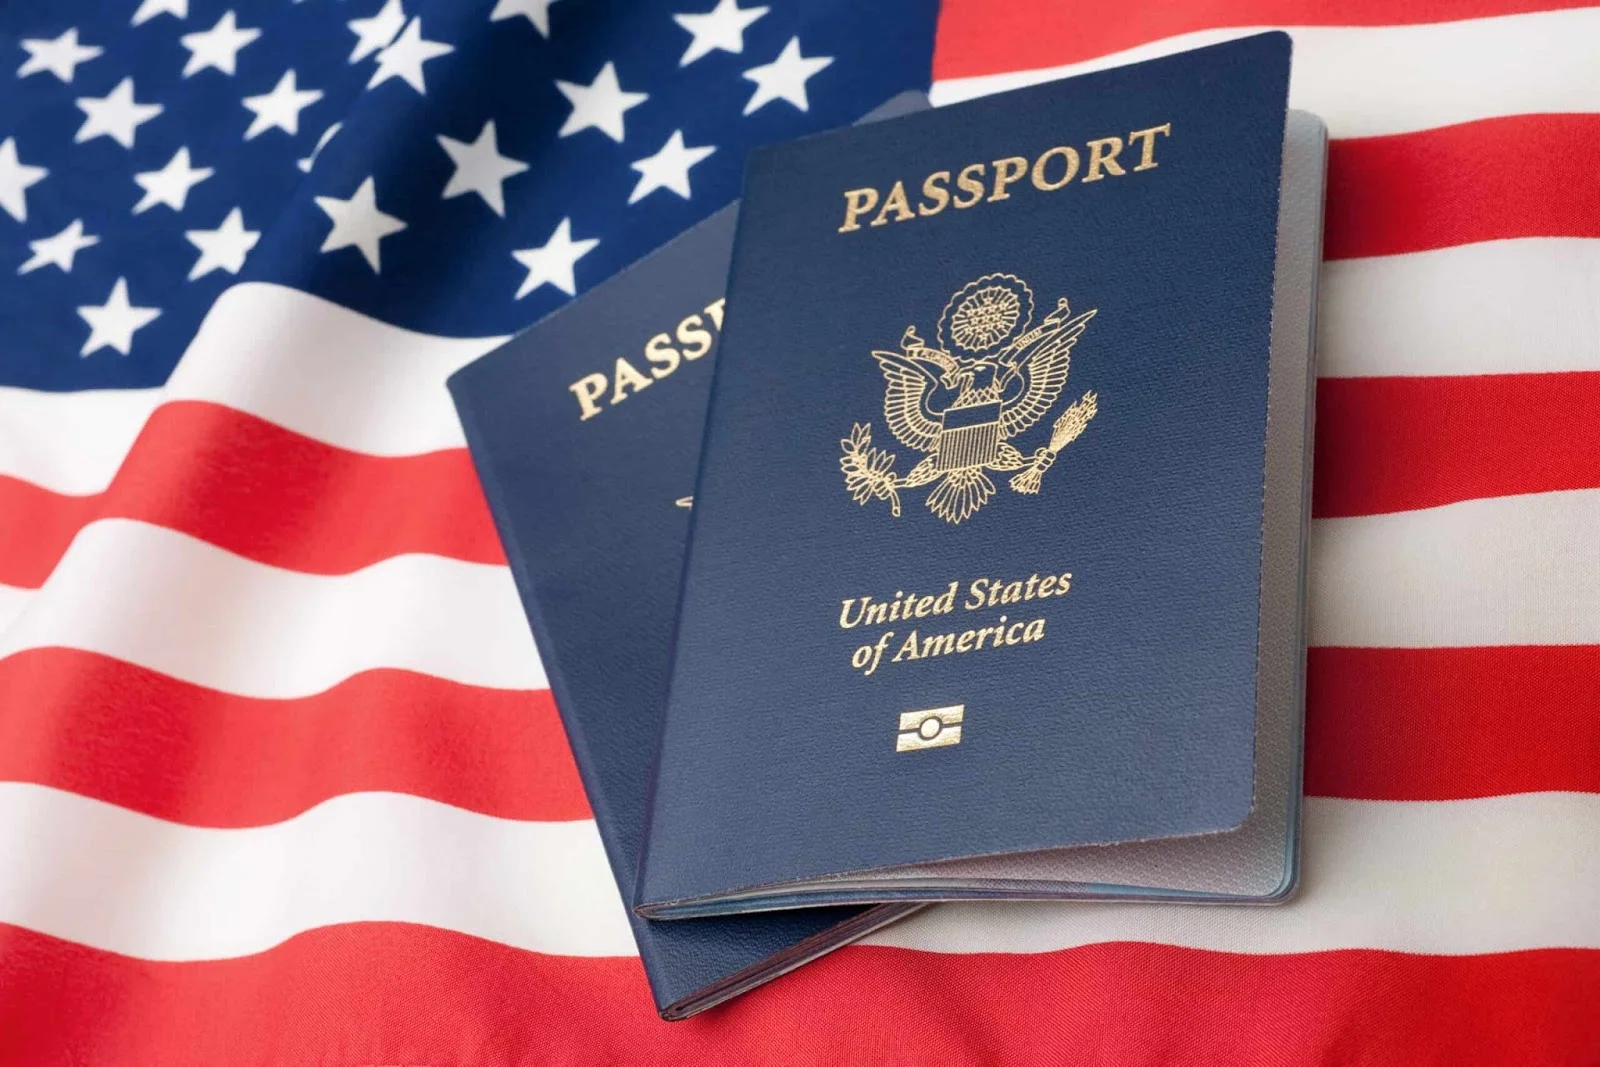 If America's So Great, Why's Our Passport So Lousy?